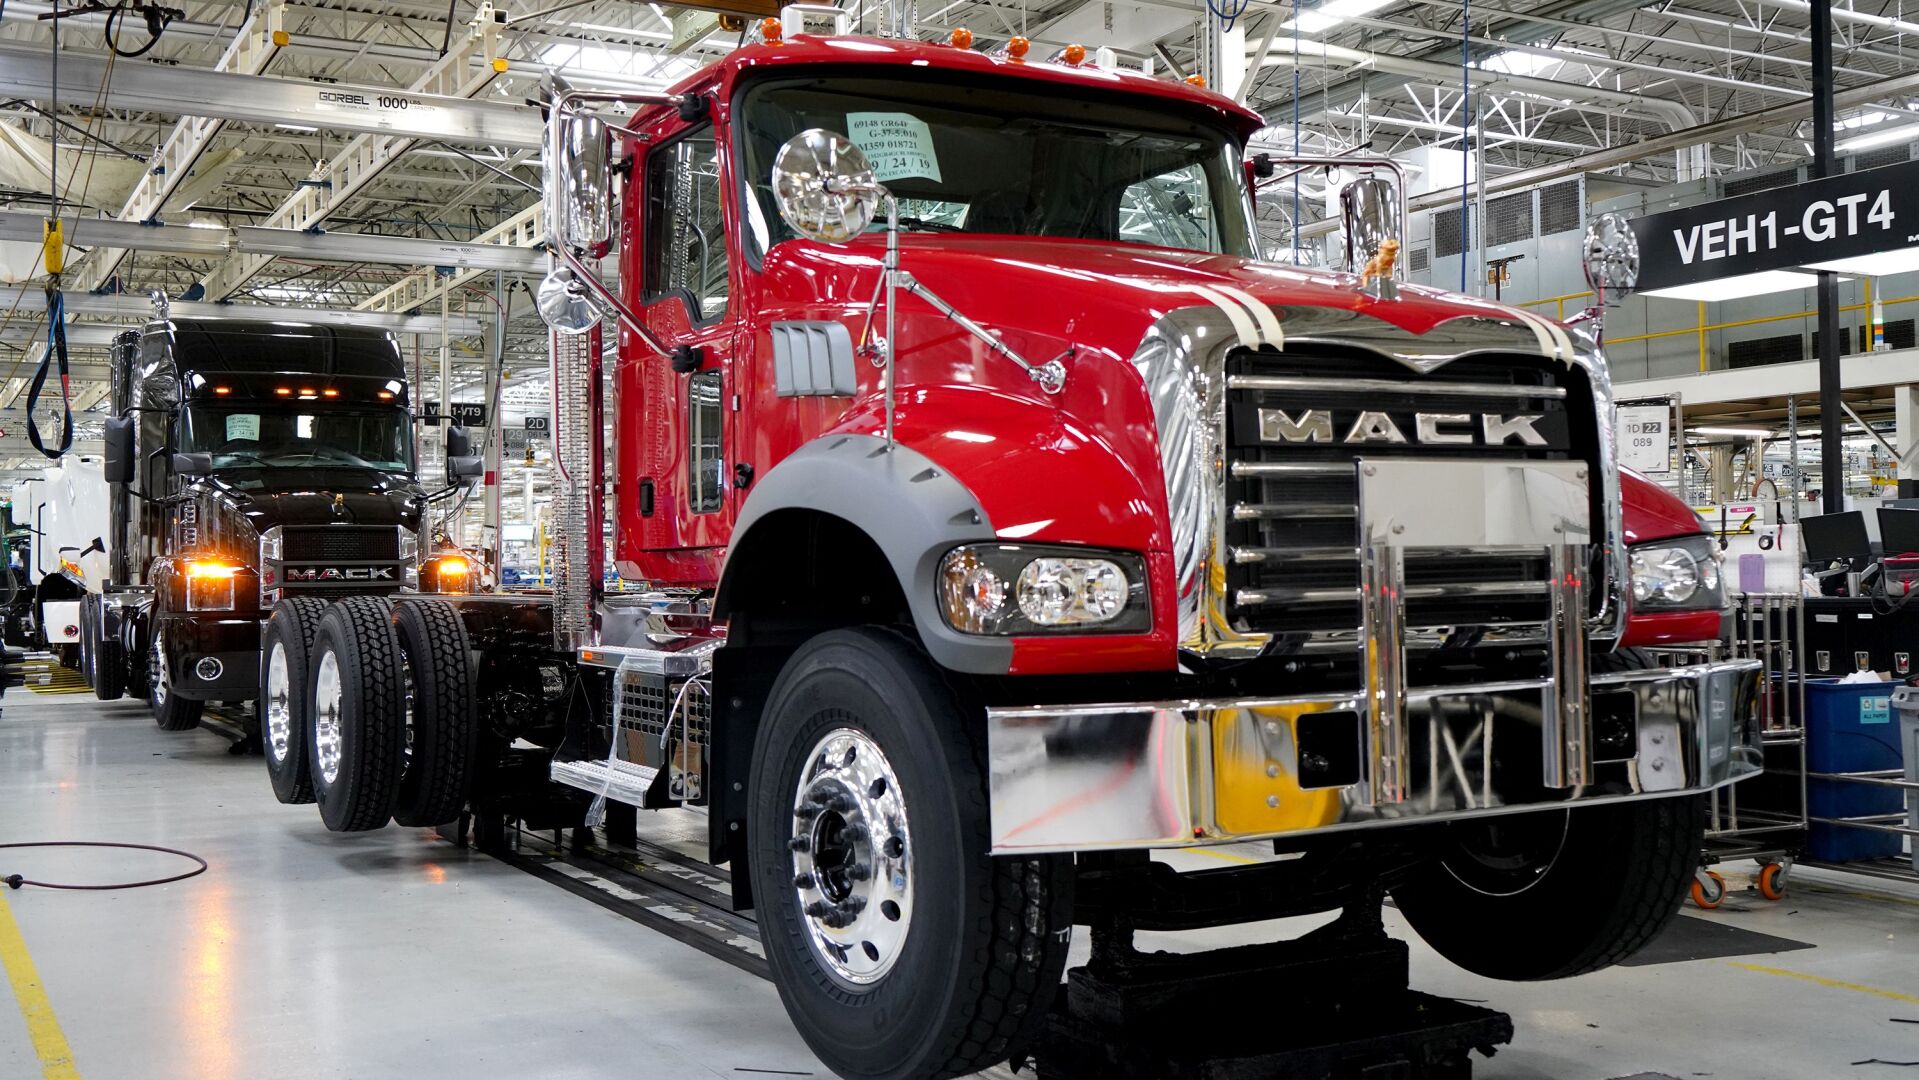 Mack continues to deliver strong results | Business News | wfmz.com